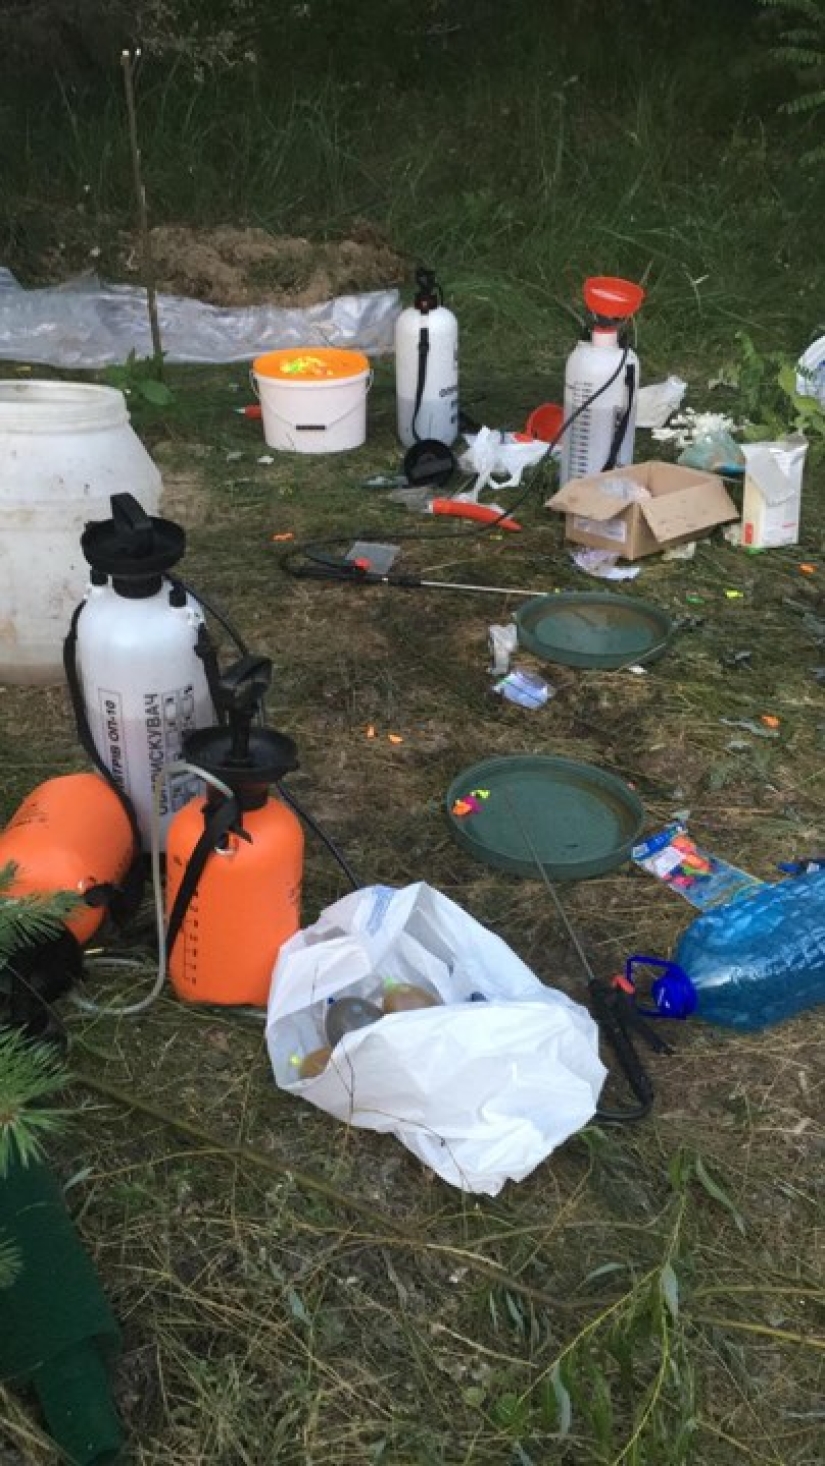 In Kiev, they wanted to throw feces at the gay parade, but the police seized "weapons"